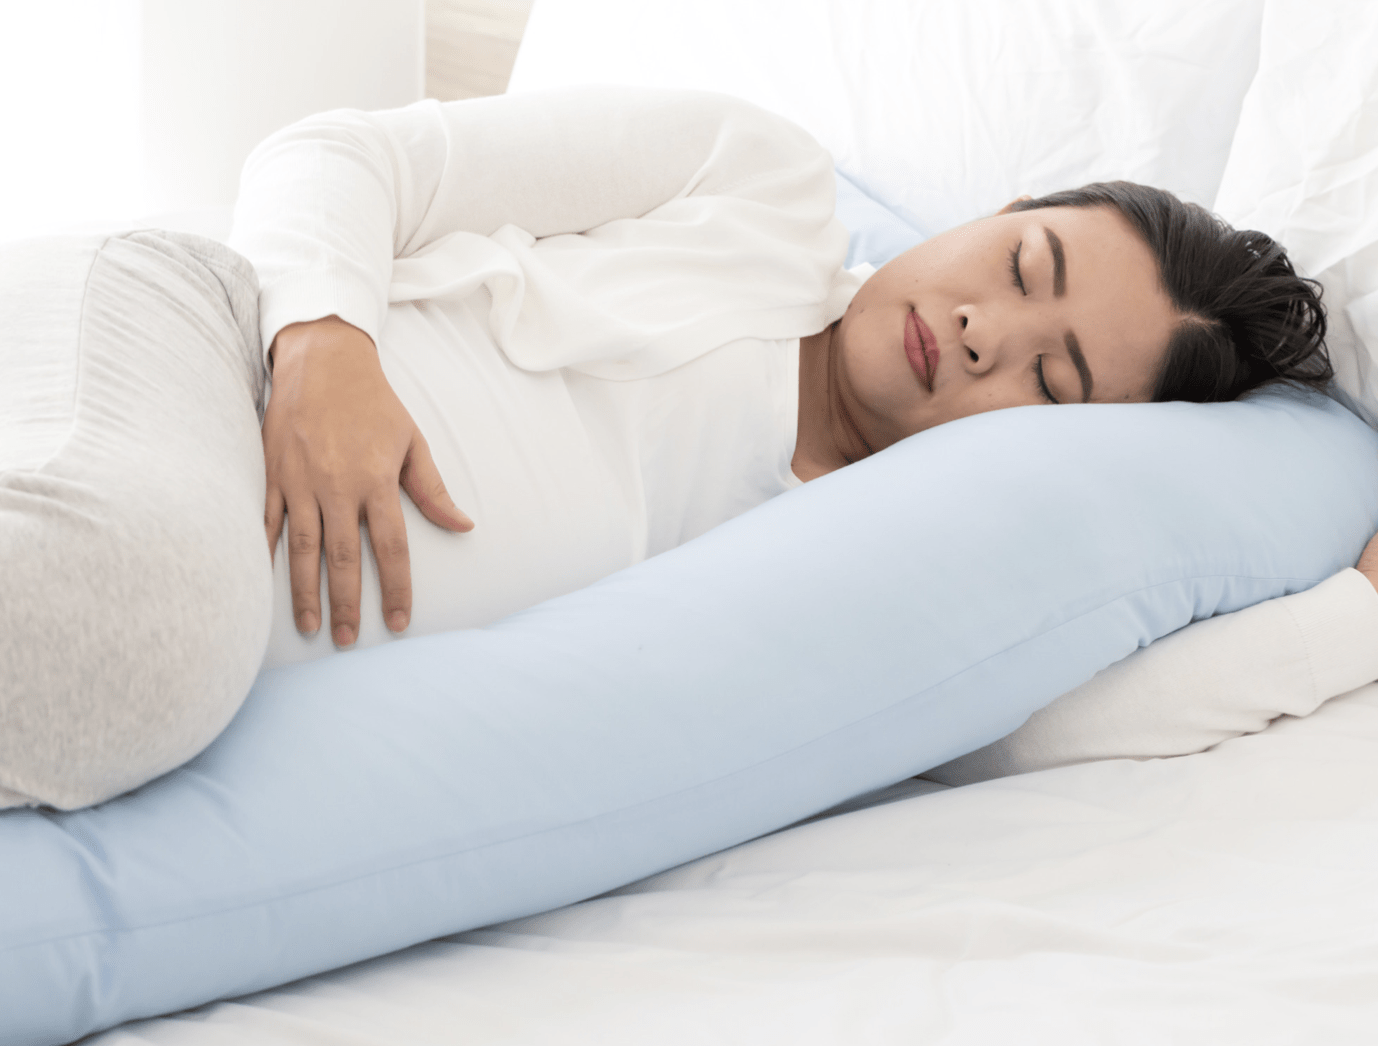 In female patients, a large pillow is placed between the two legs at